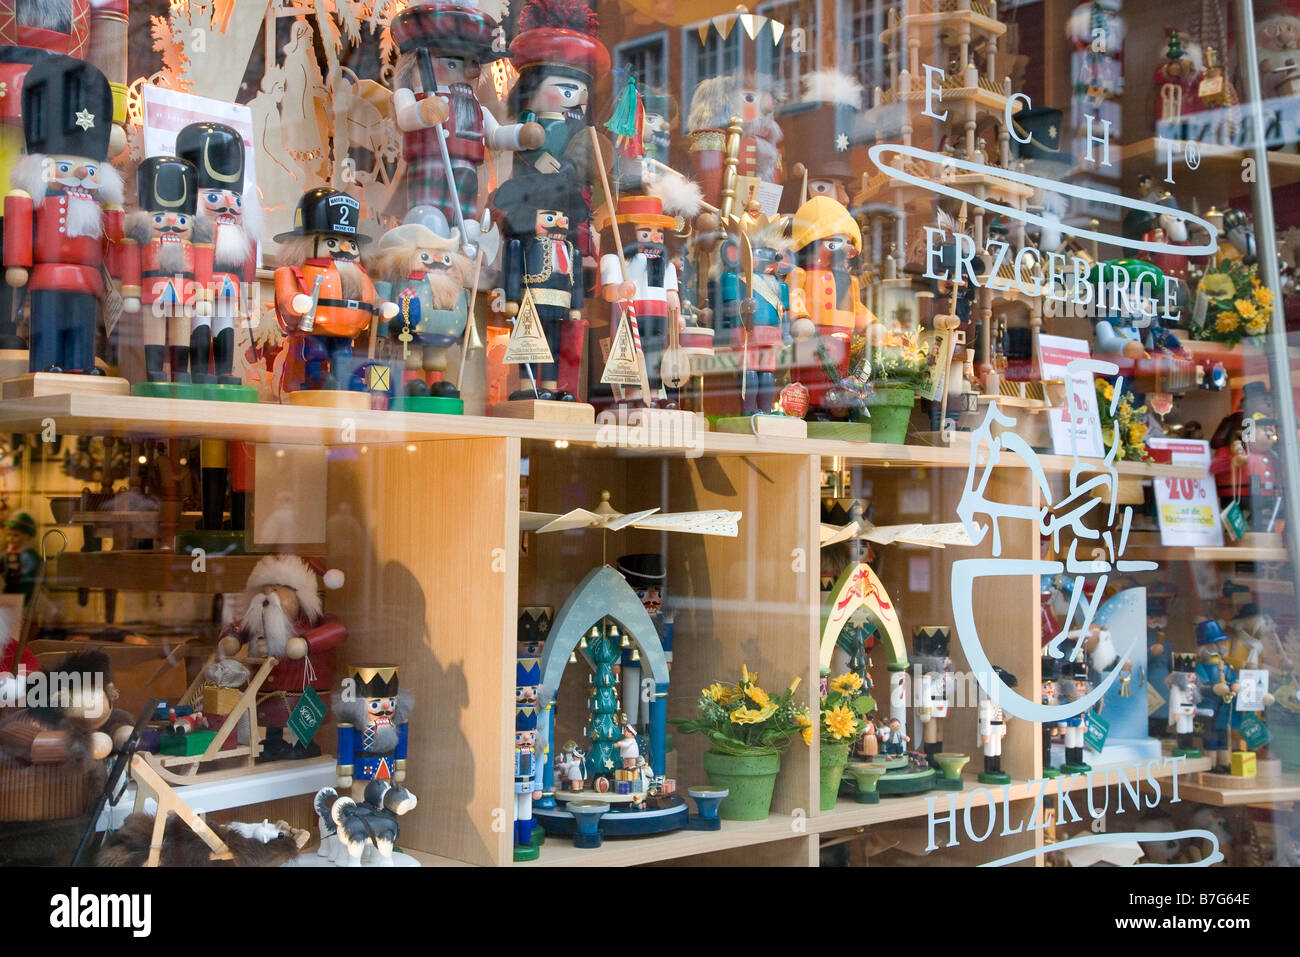 wooden toy store near me